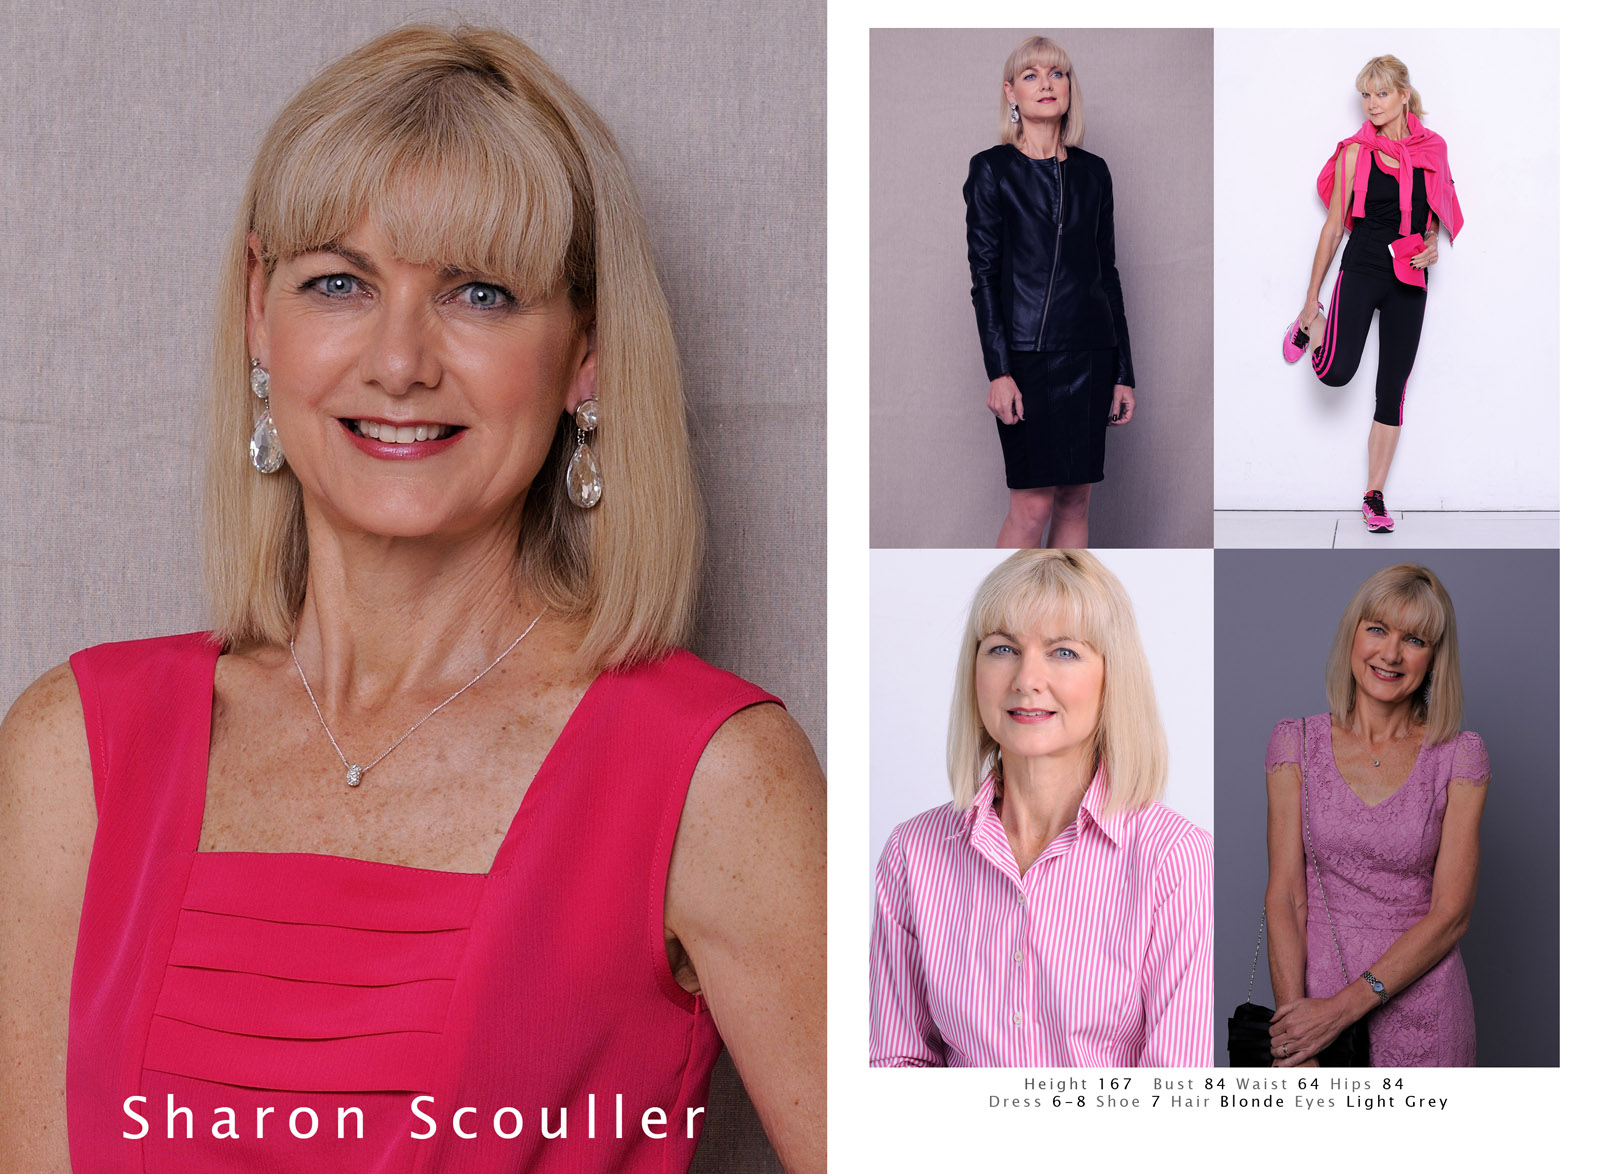 Comp Card, senior model. Modelling Portfolio headshots for Fashion, Fitness, Beauty for womwn and men.